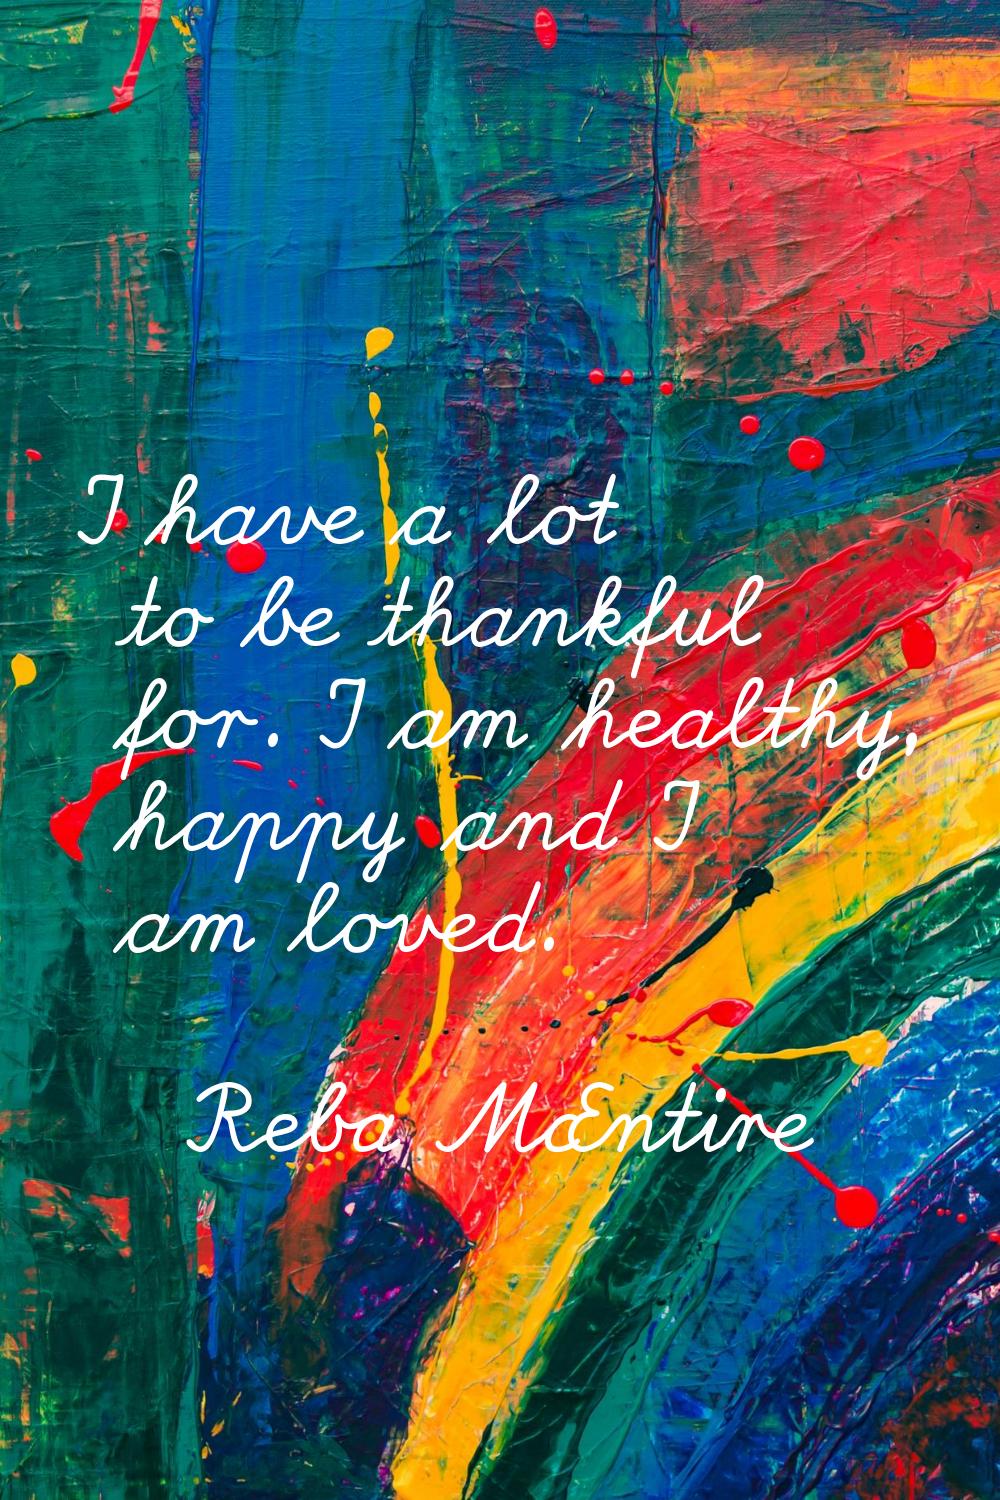 I have a lot to be thankful for. I am healthy, happy and I am loved.